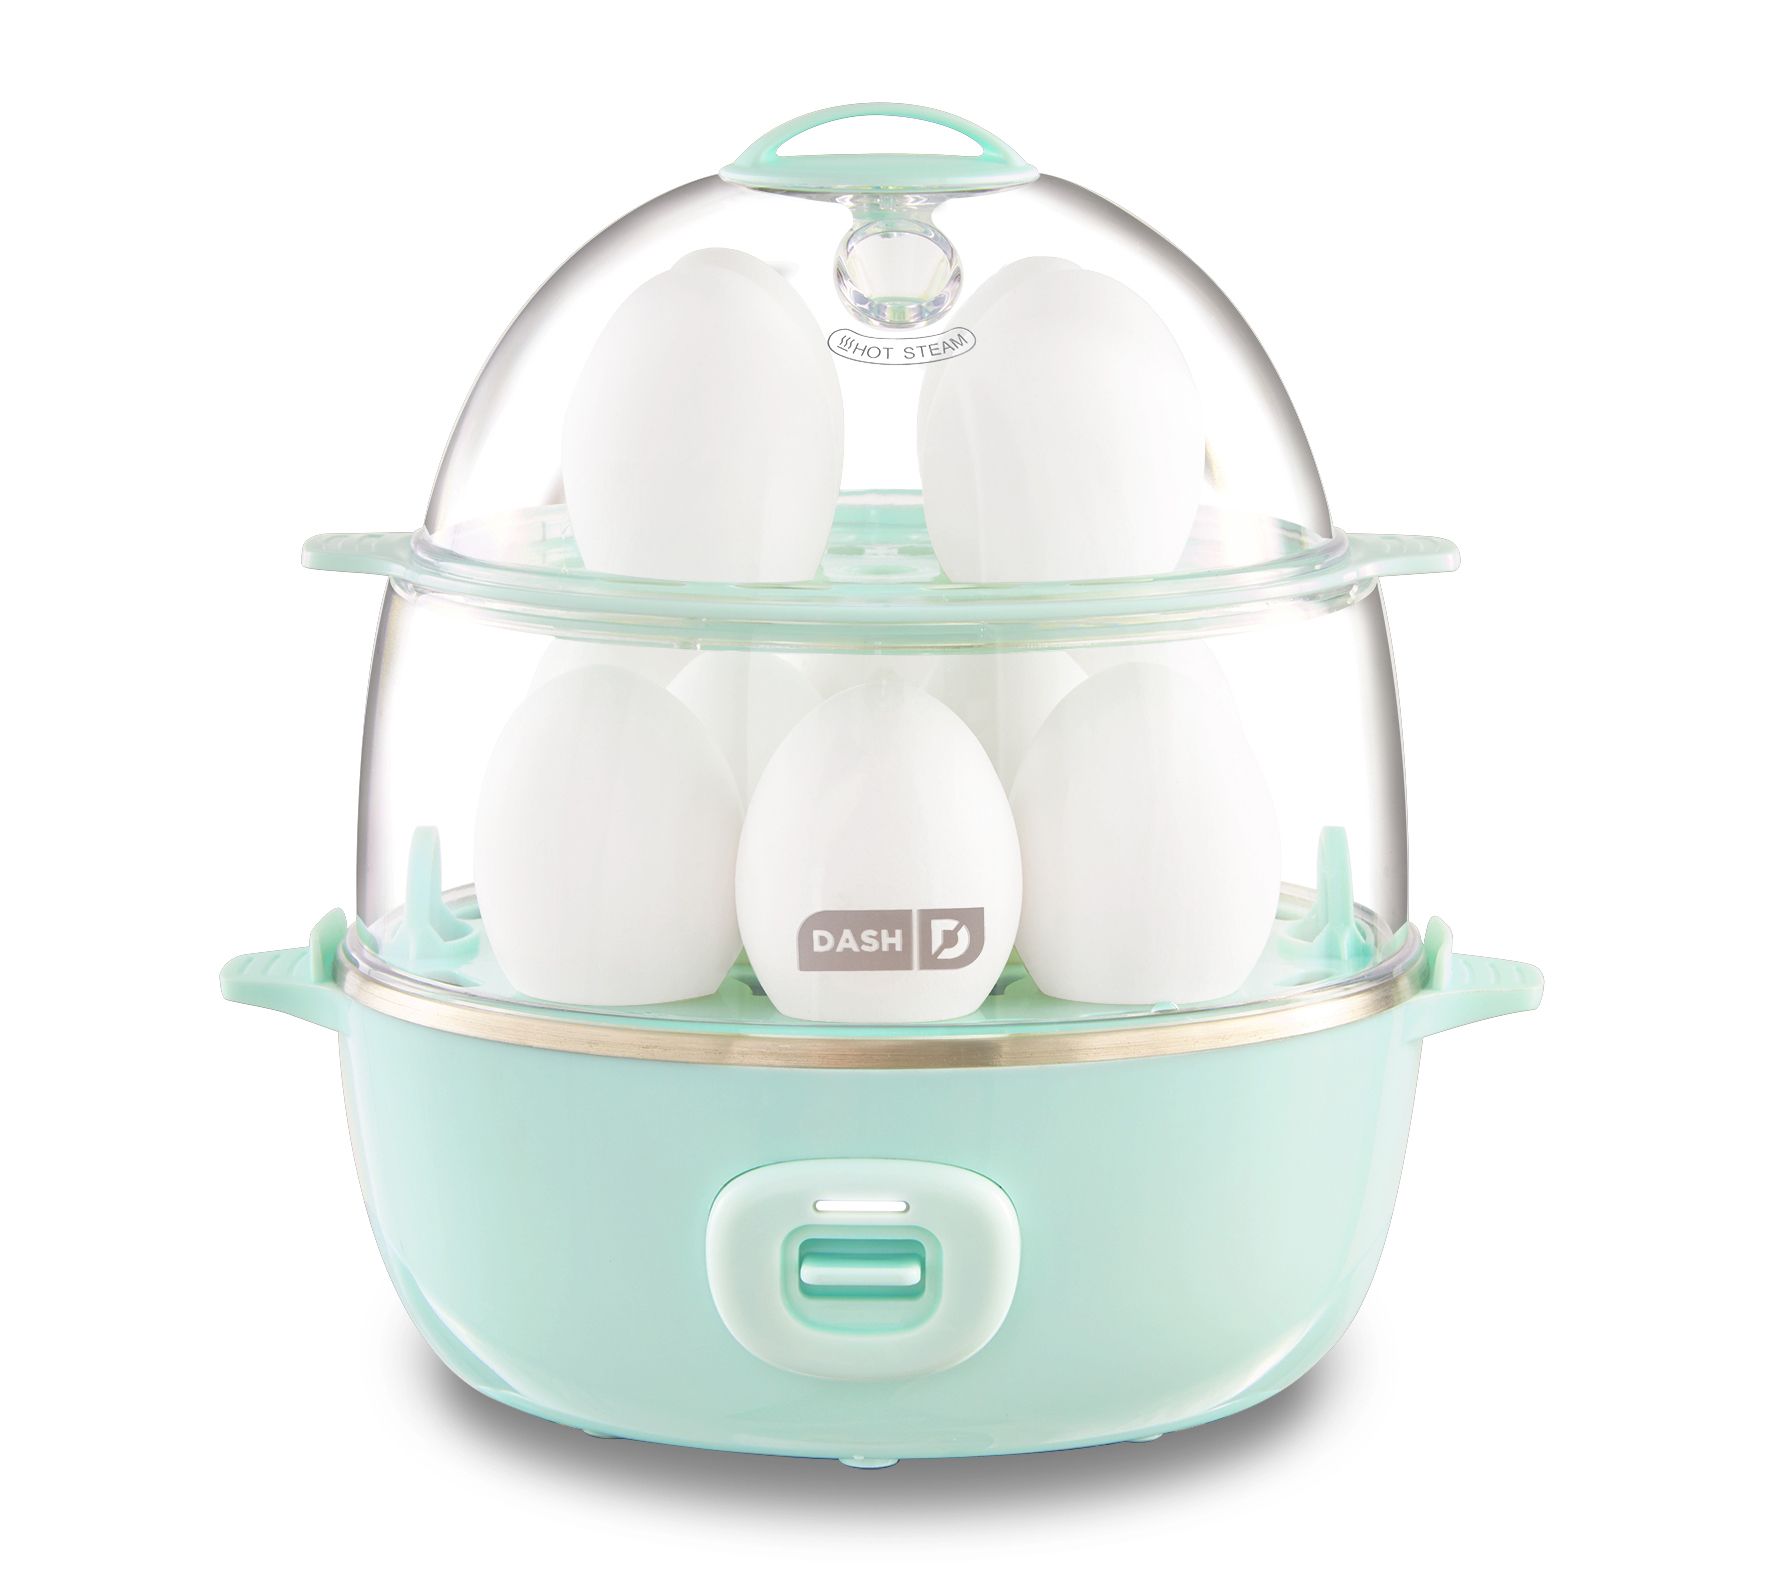 Dash Deluxe Express Two-Tier Egg Cooker Cooker